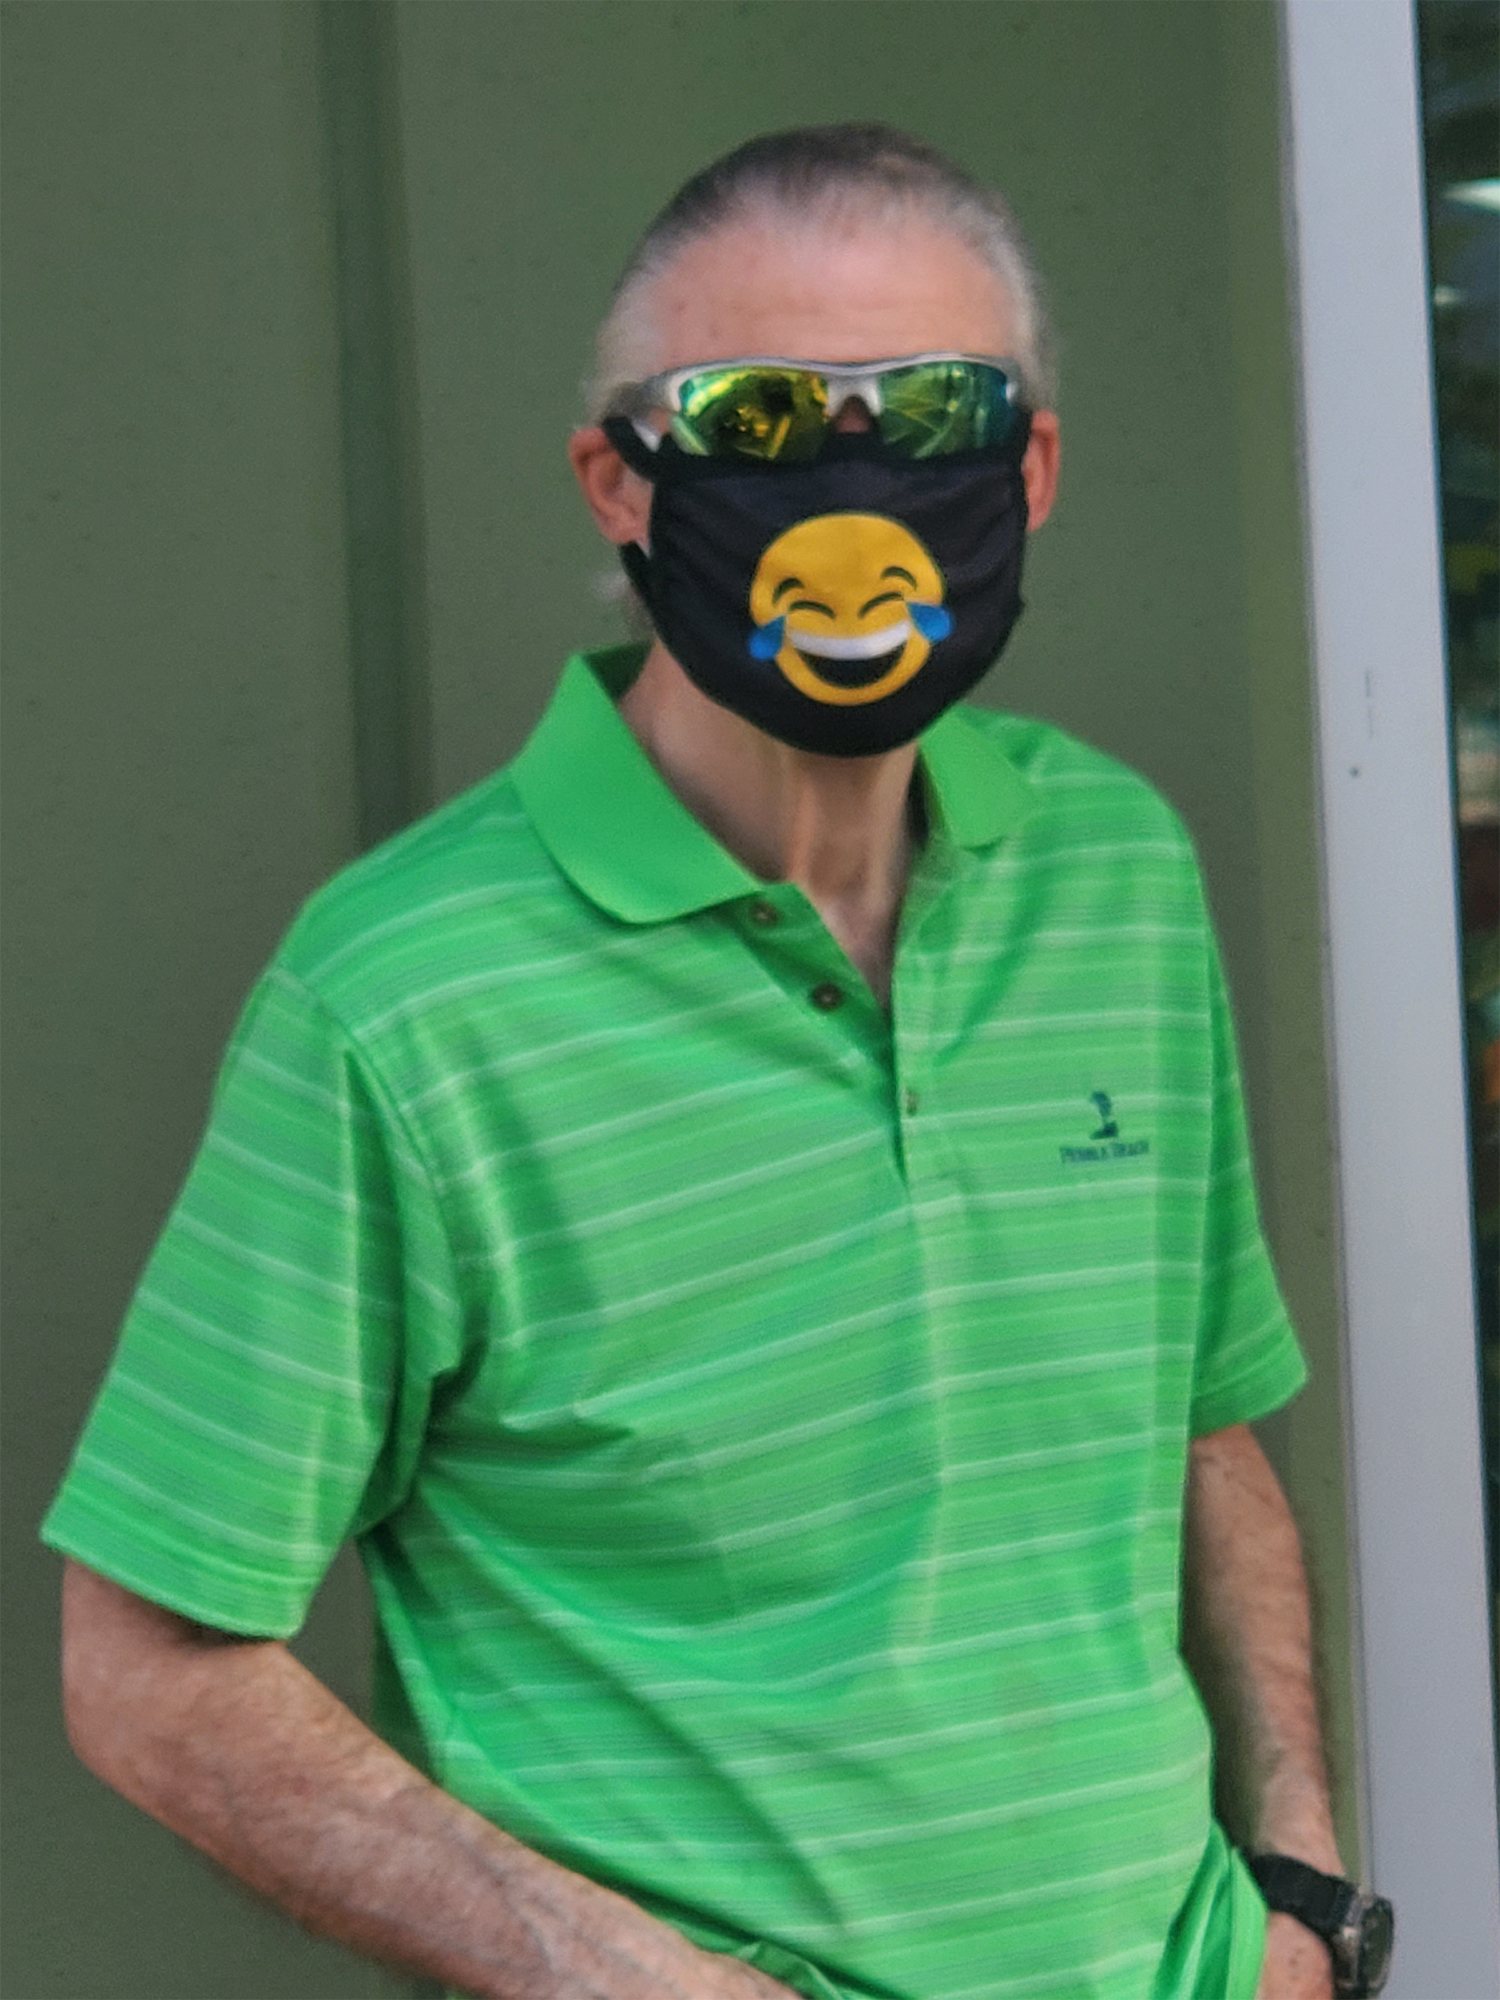 Older man with mask and green shirt